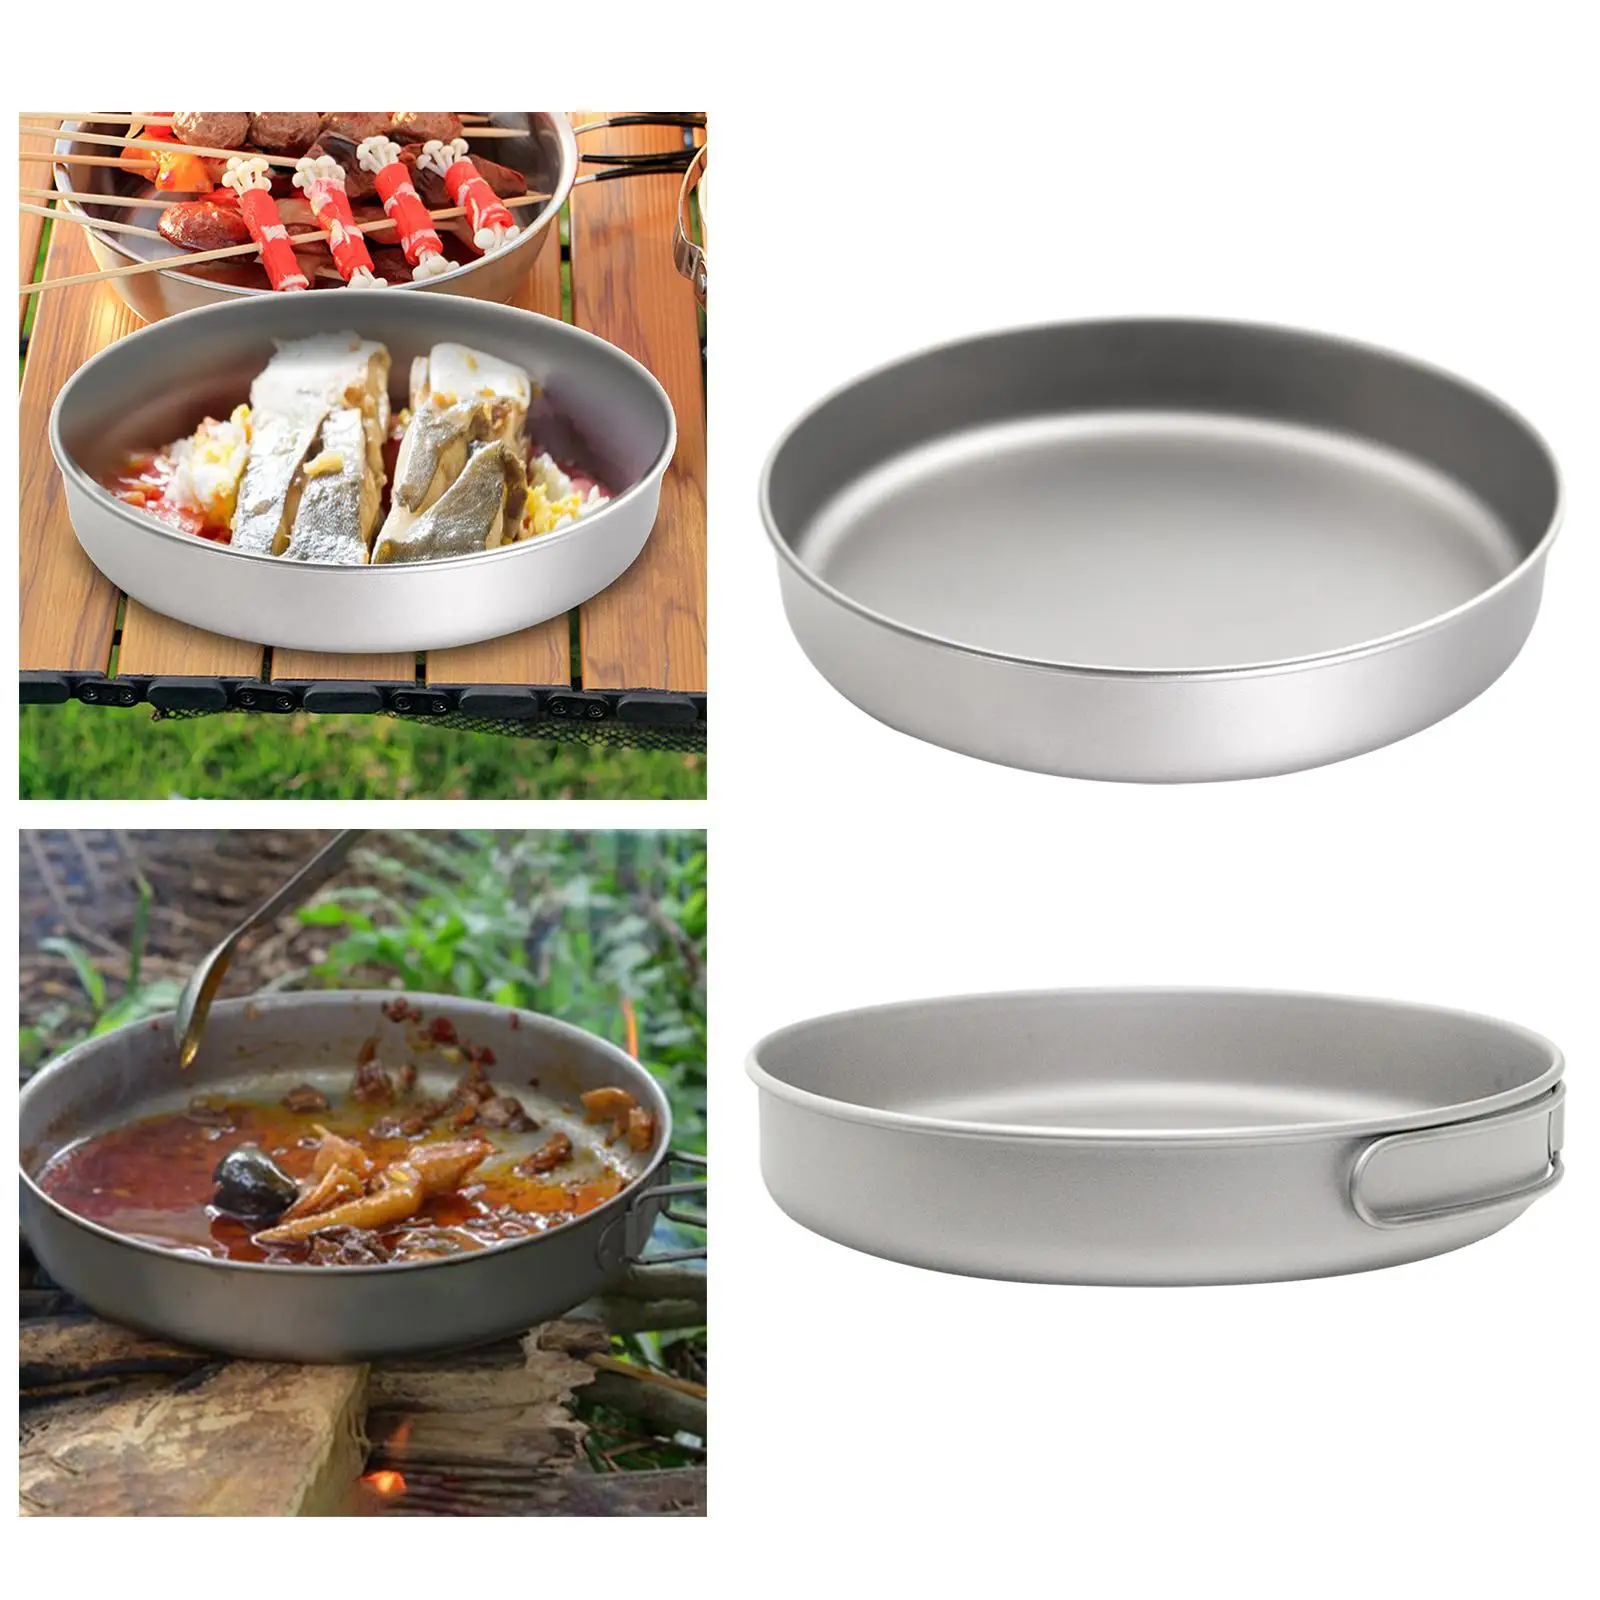 Titanium Pan Camping Cookware Cooking Equipment for Backpacking Hiking